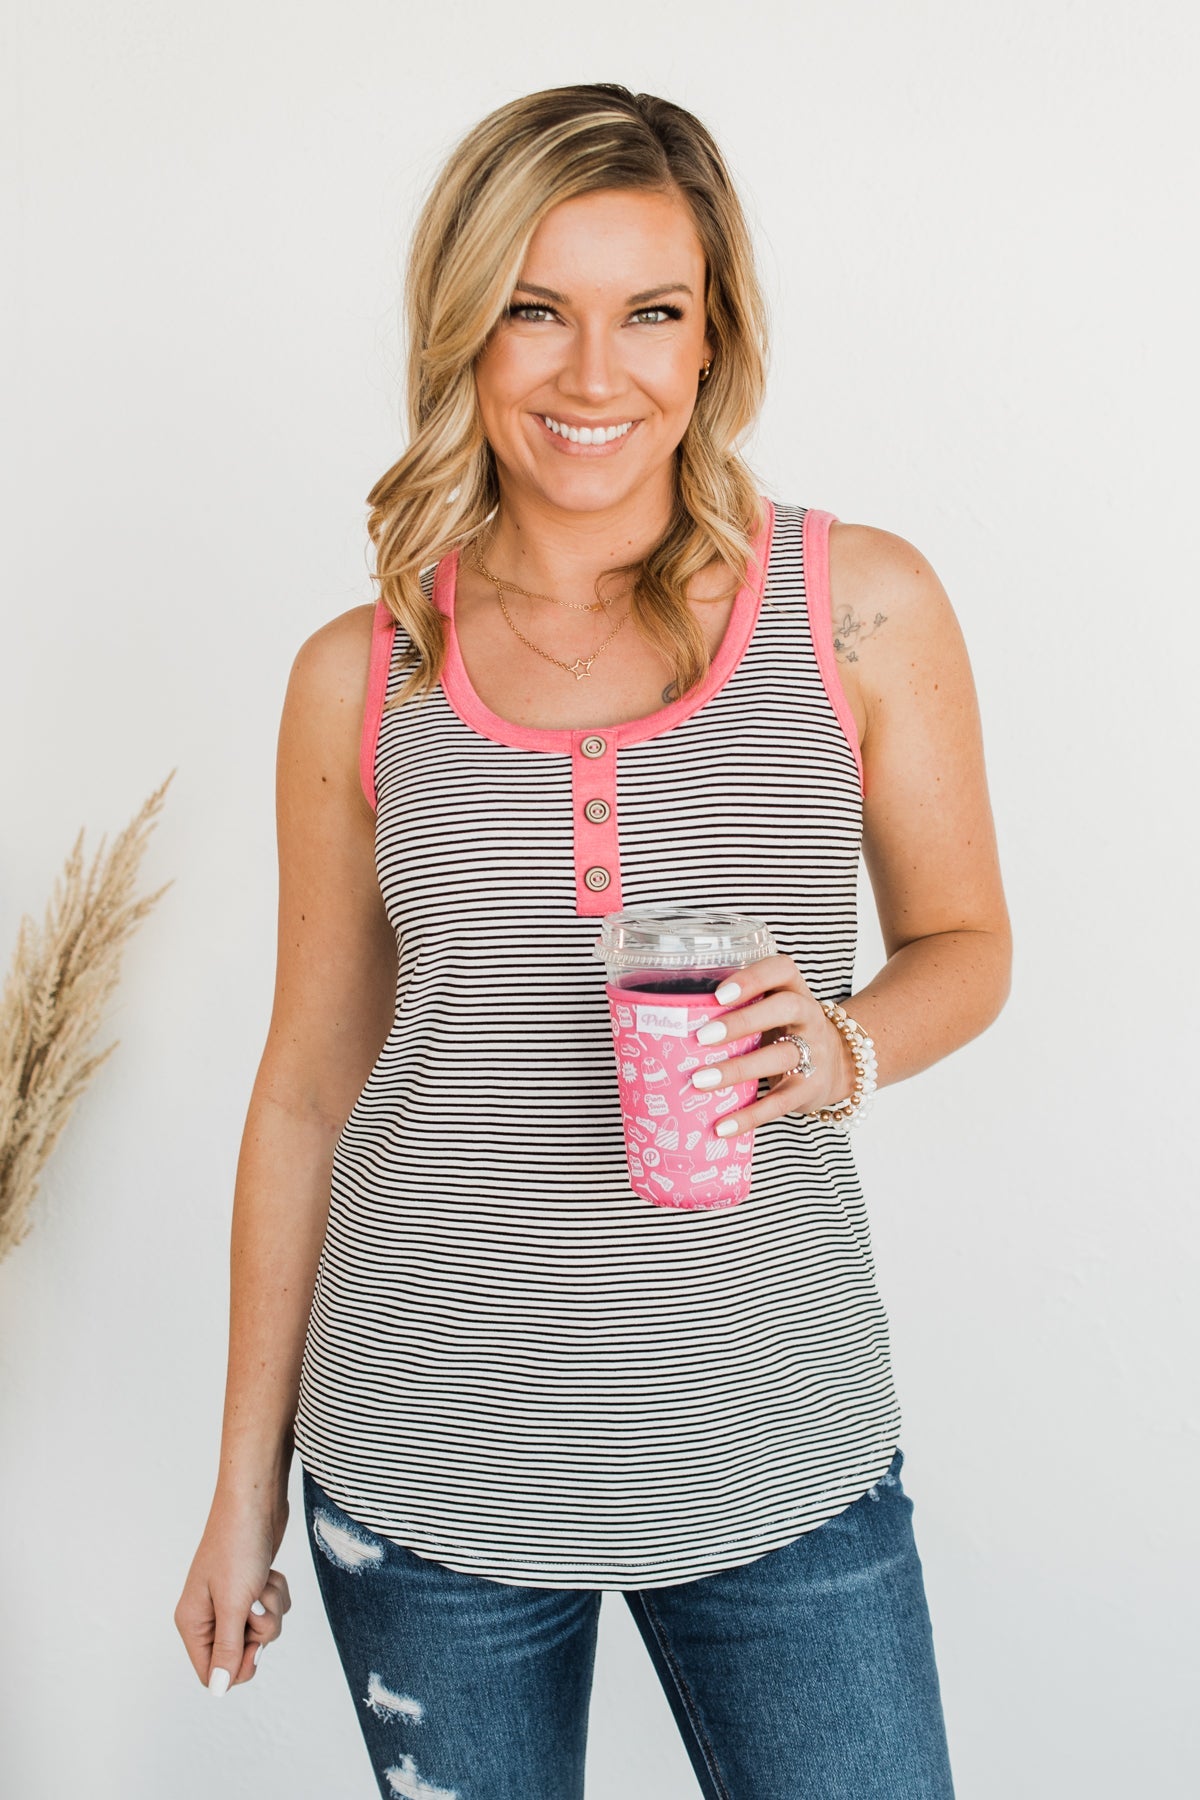 Slowing Down Time Striped Tank Top- Black & Ivory